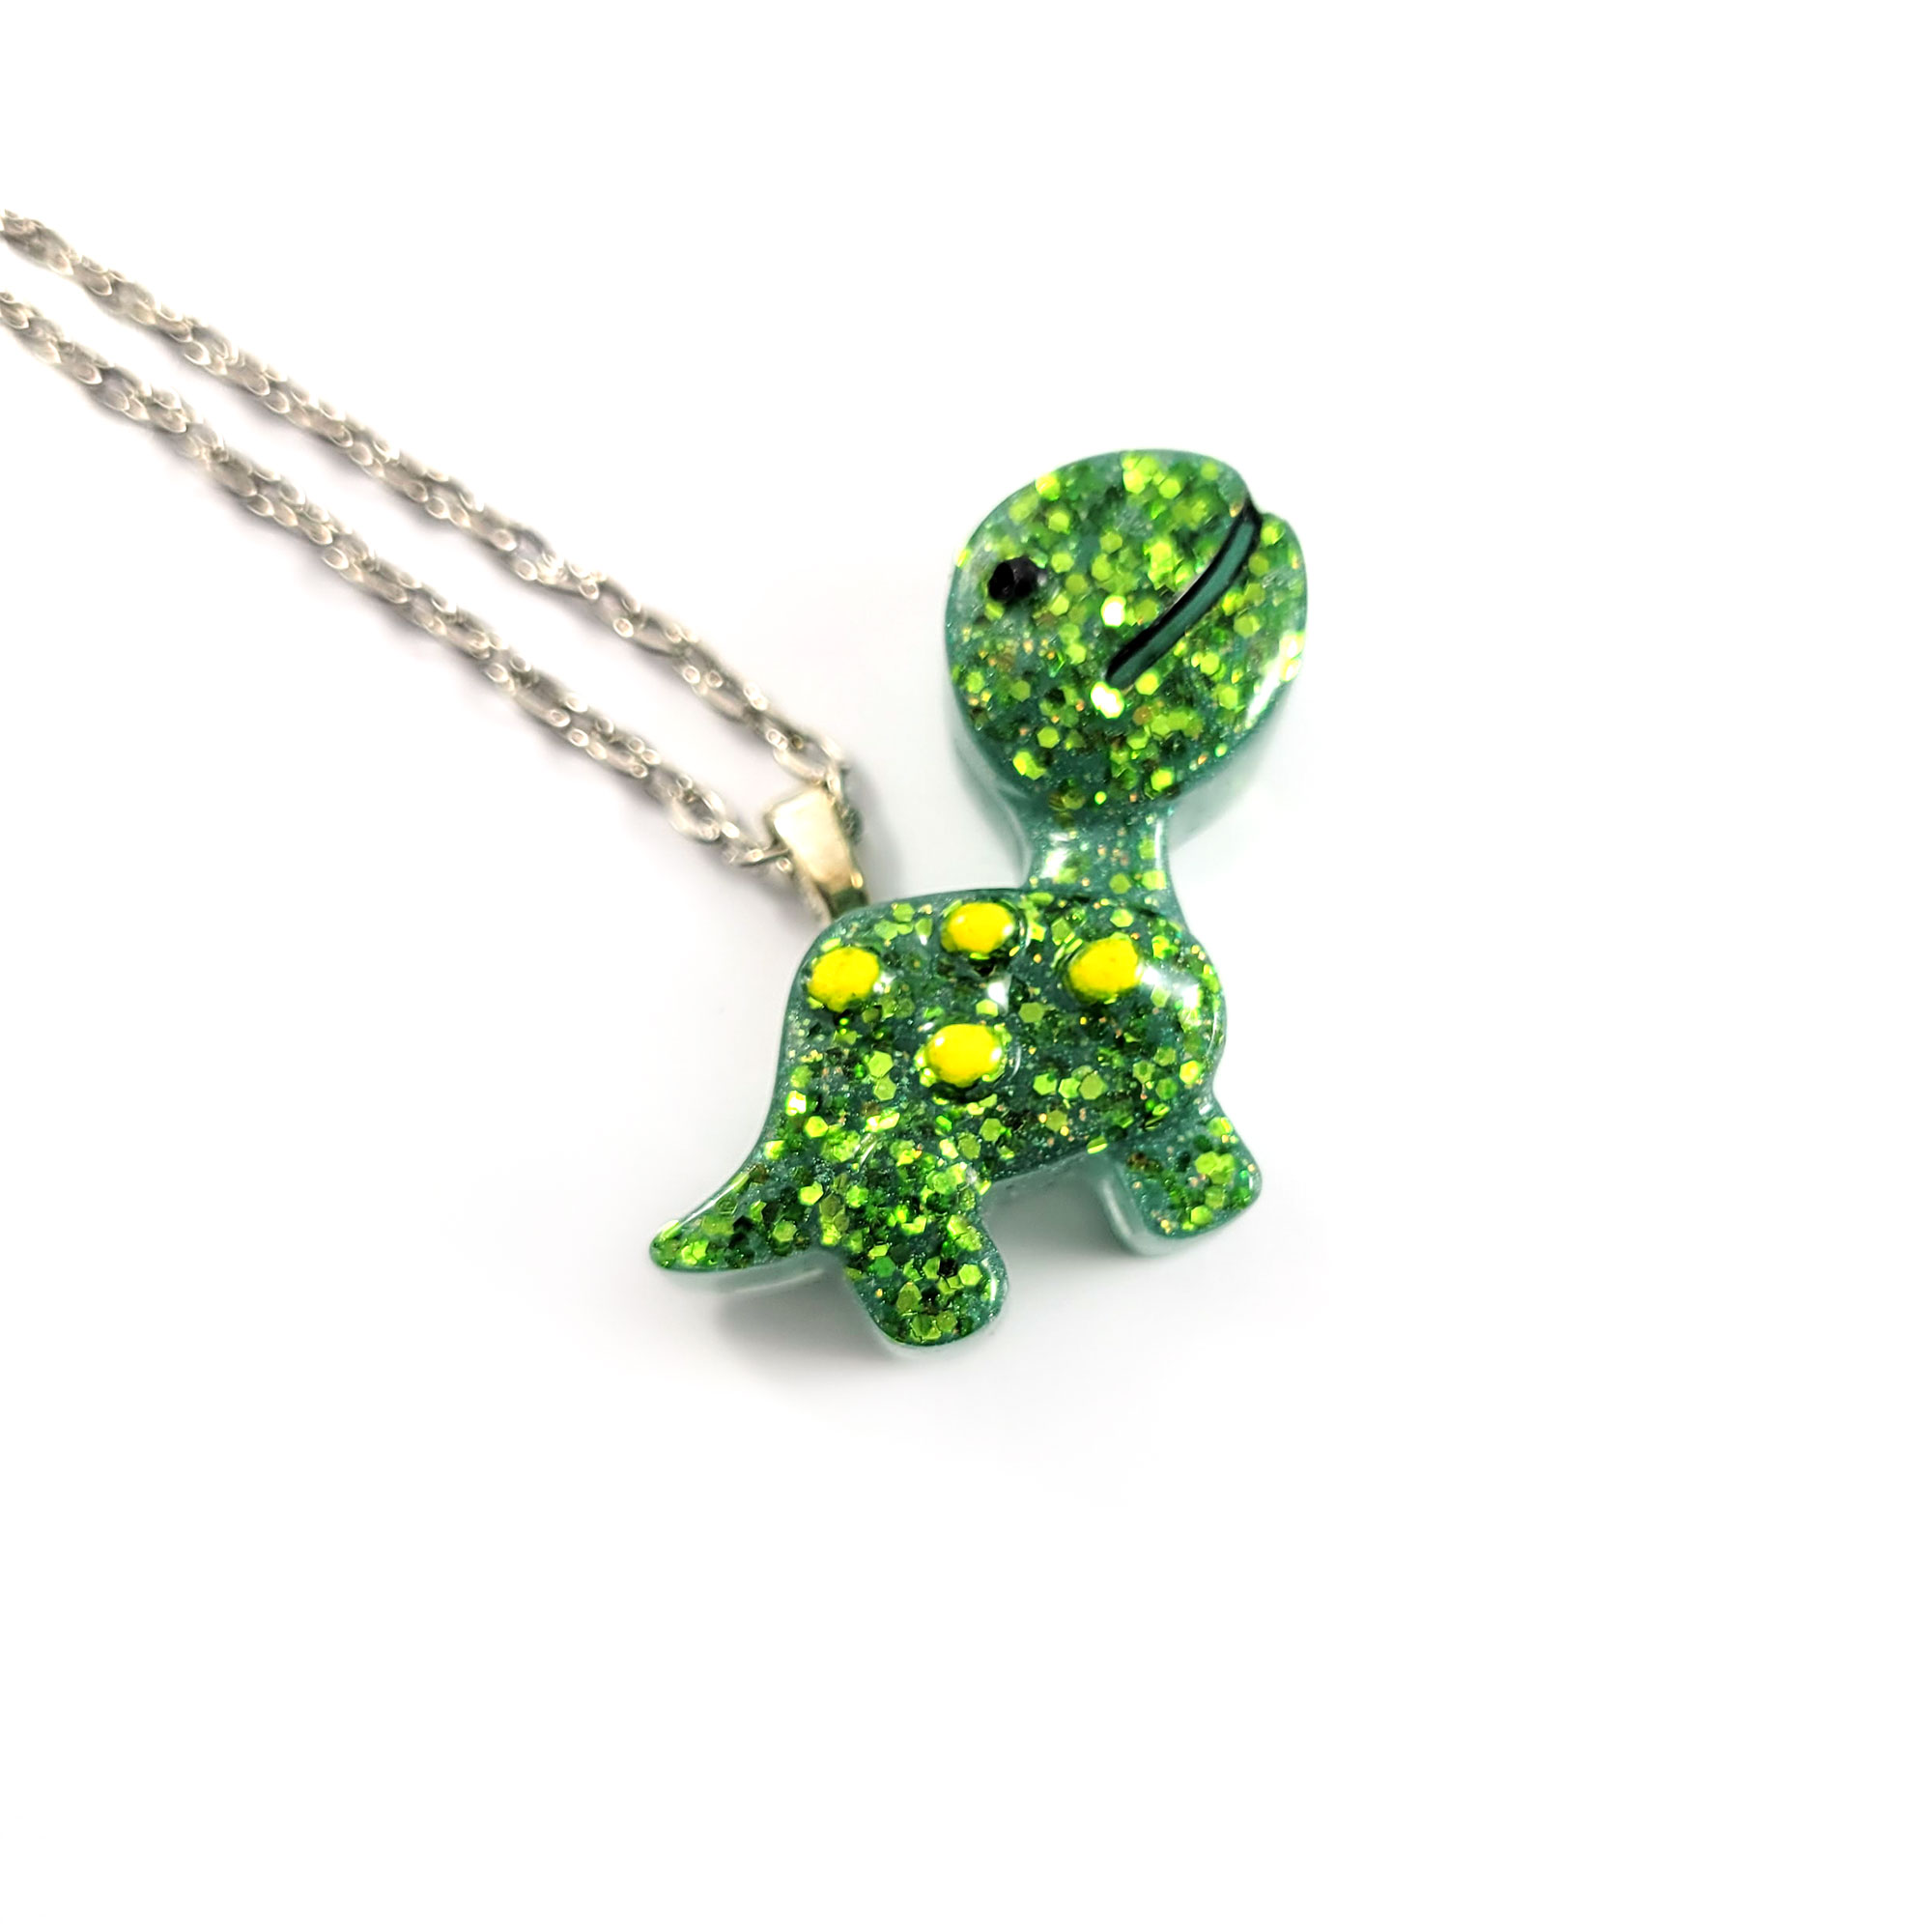 Jurassic Cutie Green Brontosaurus Resin Necklace with Yellow by Wilde Designs